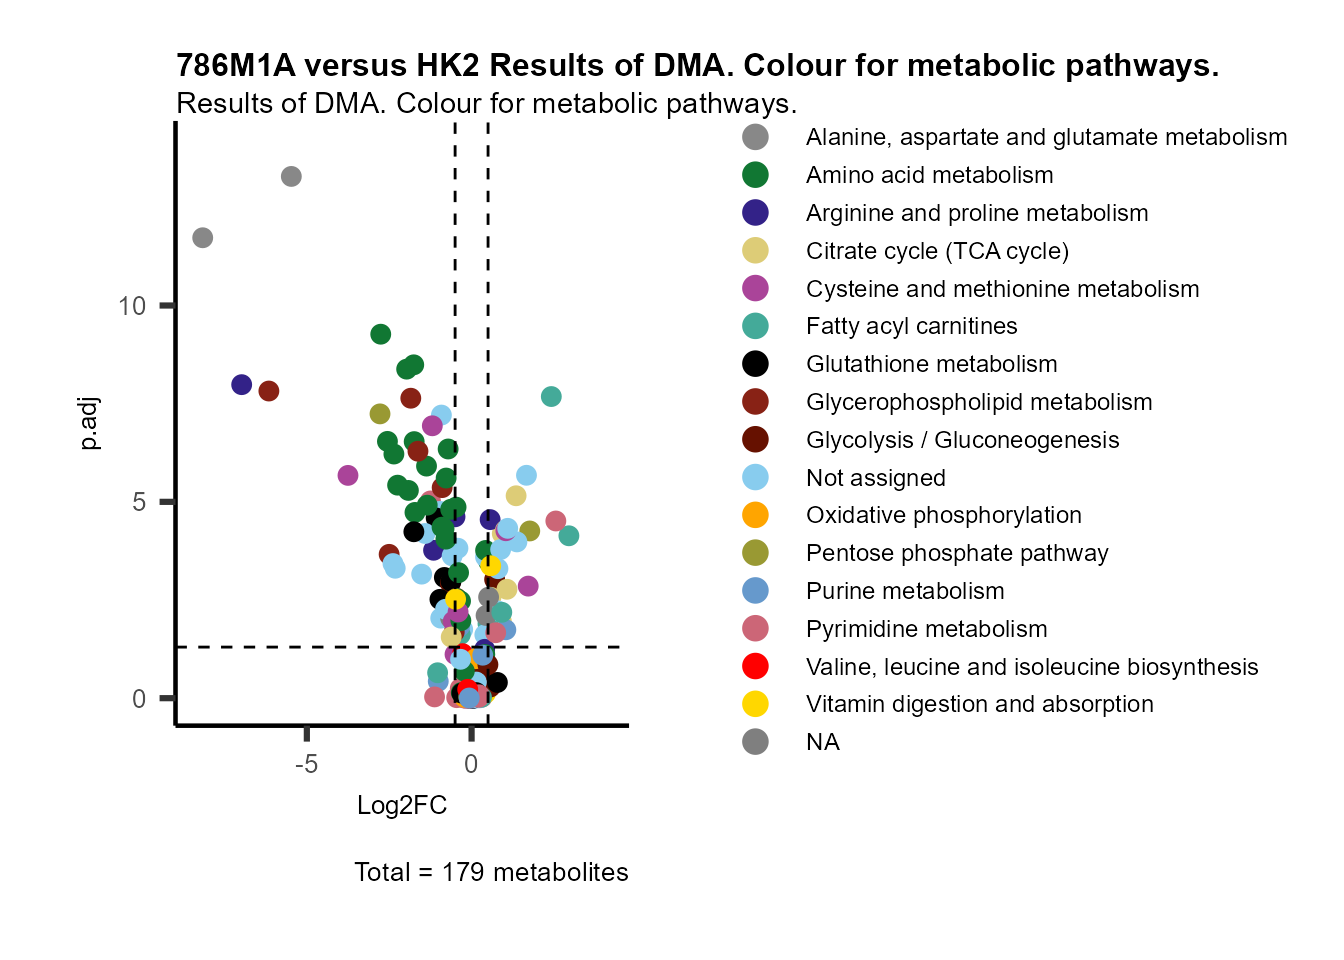 Figure: Standard figure displaying DMA results colour coded for metabolic pathways and shaped for metabolic clusters from MCA results.